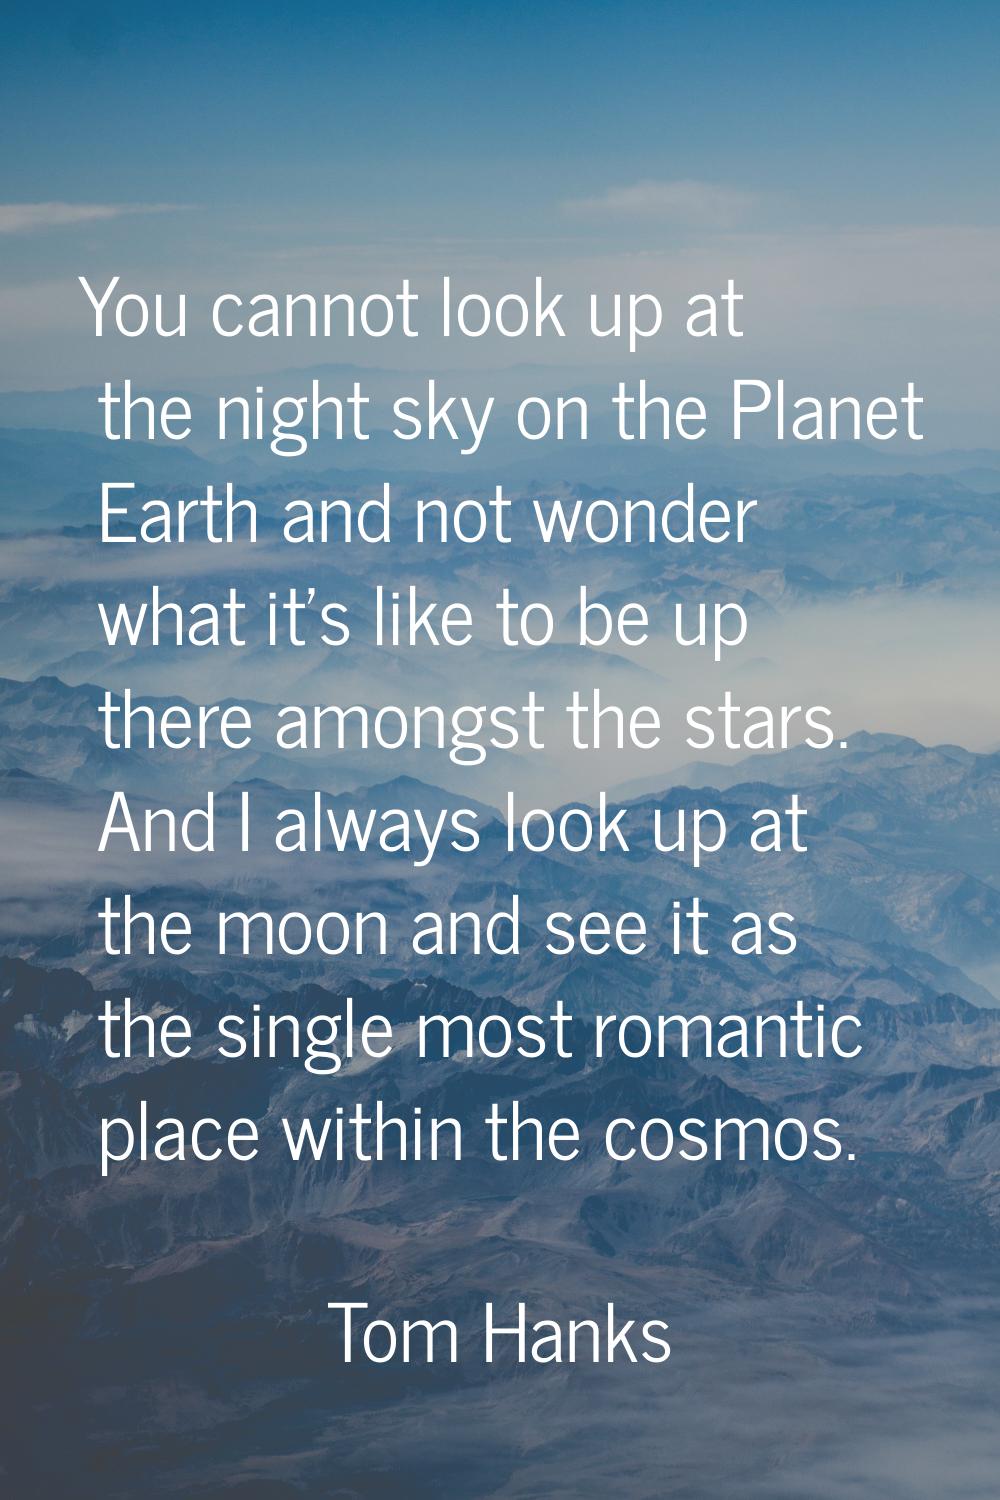 You cannot look up at the night sky on the Planet Earth and not wonder what it's like to be up ther